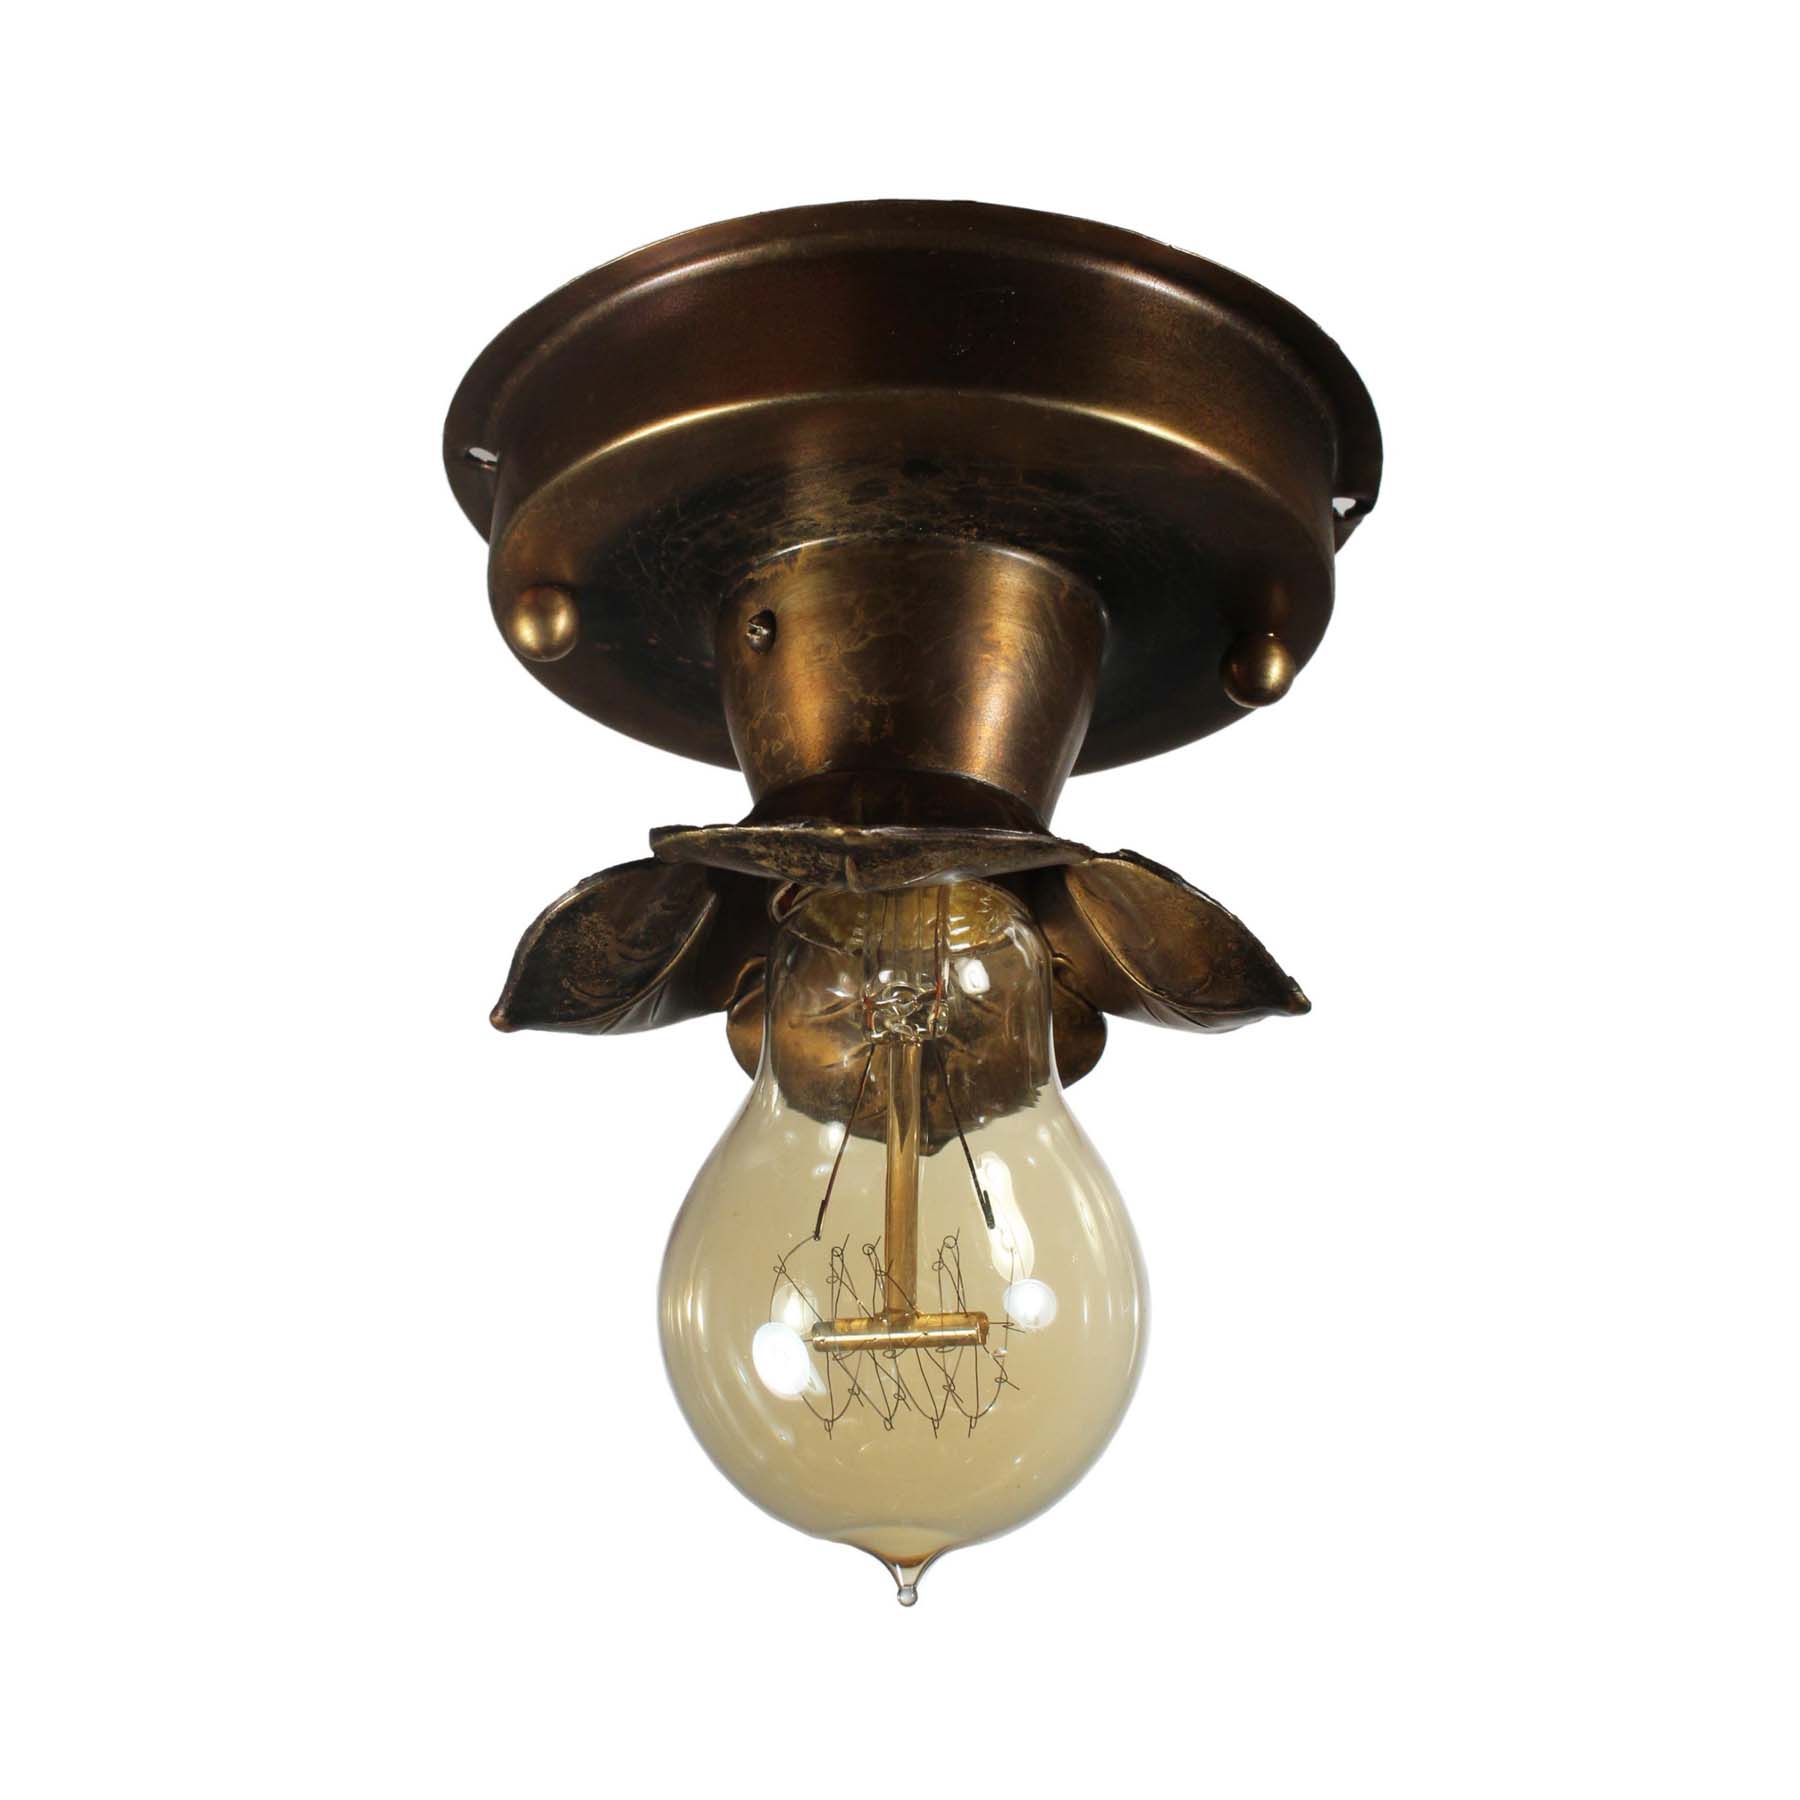 SOLD Brass Flush-Mount Lights with Exposed Bulbs, Antique Lighting-67129